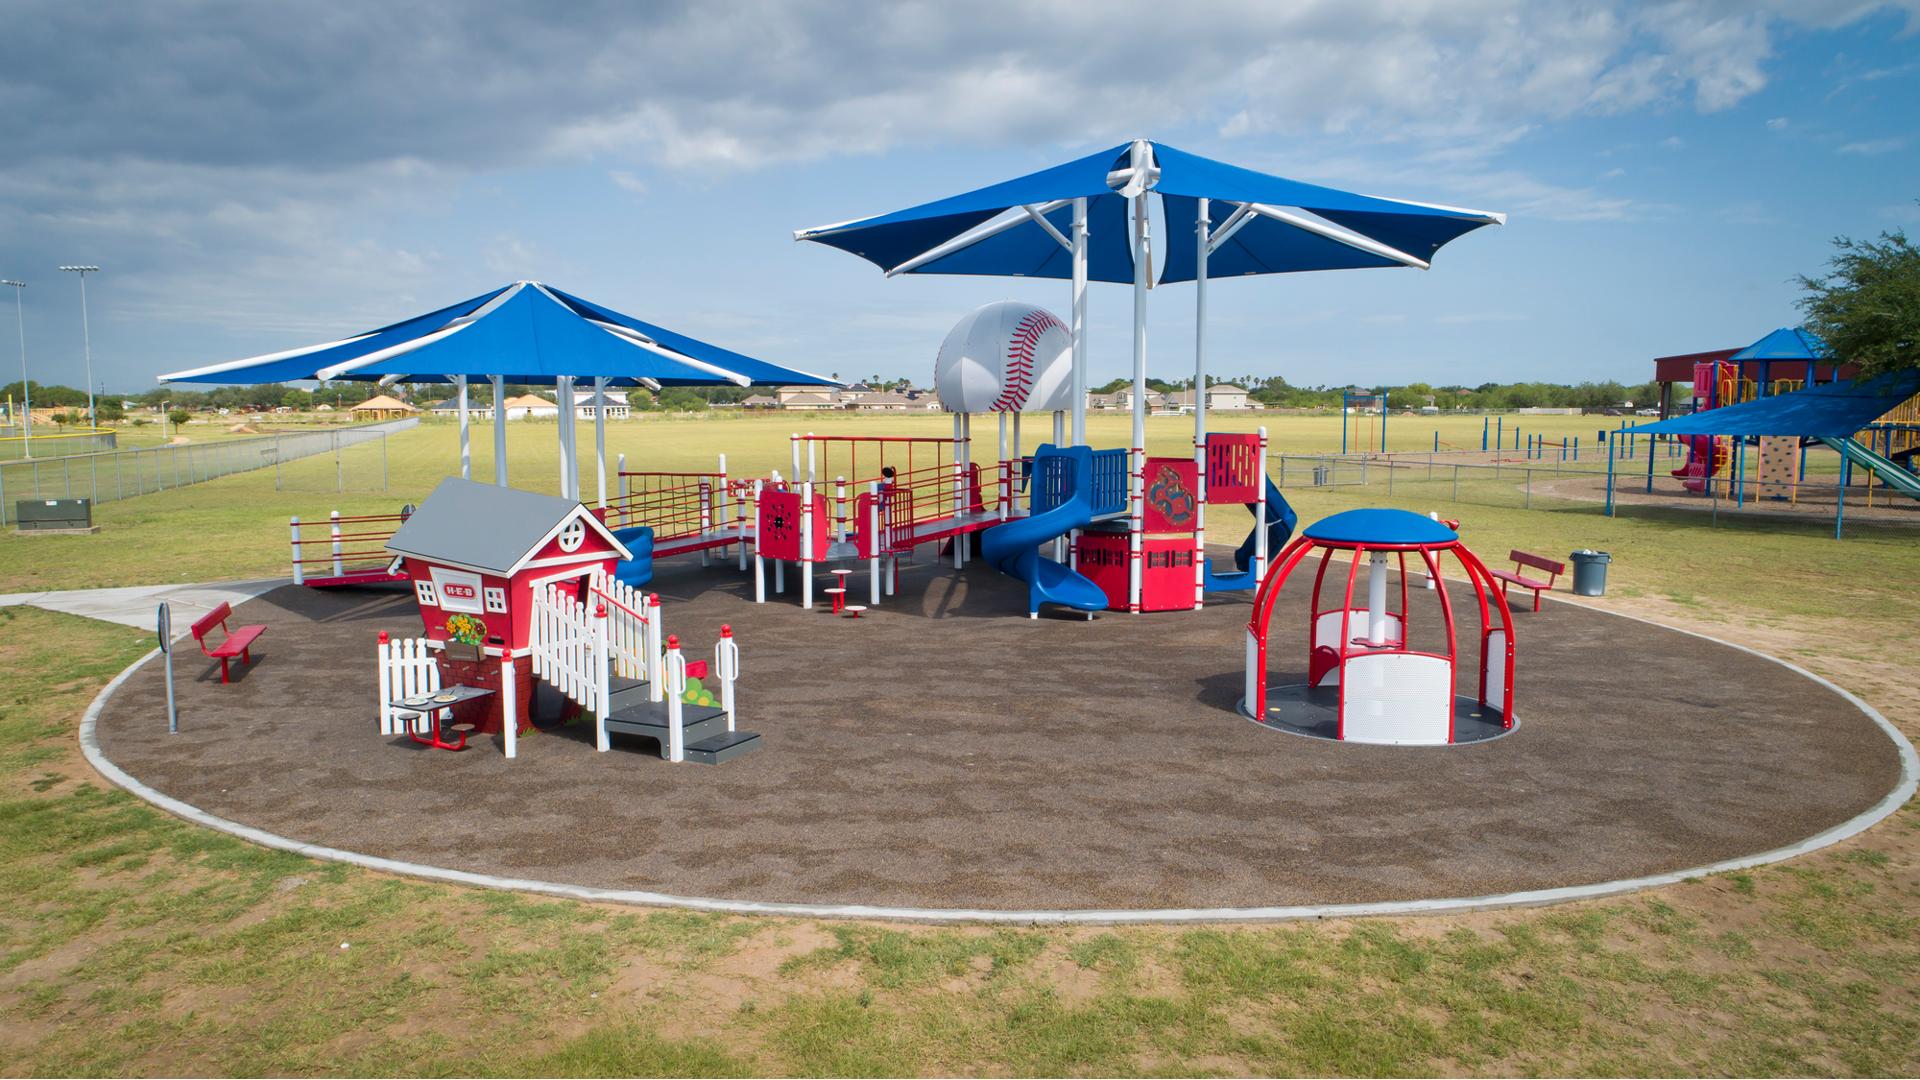 A designated circular play area has one large inclusive baseball themed play structure with accessible ramps, play panels, and two large hexagonal shade systems overhead. A second small play structure designed like a small home sits in front of the large playground along with a inclusive manual carousel. 